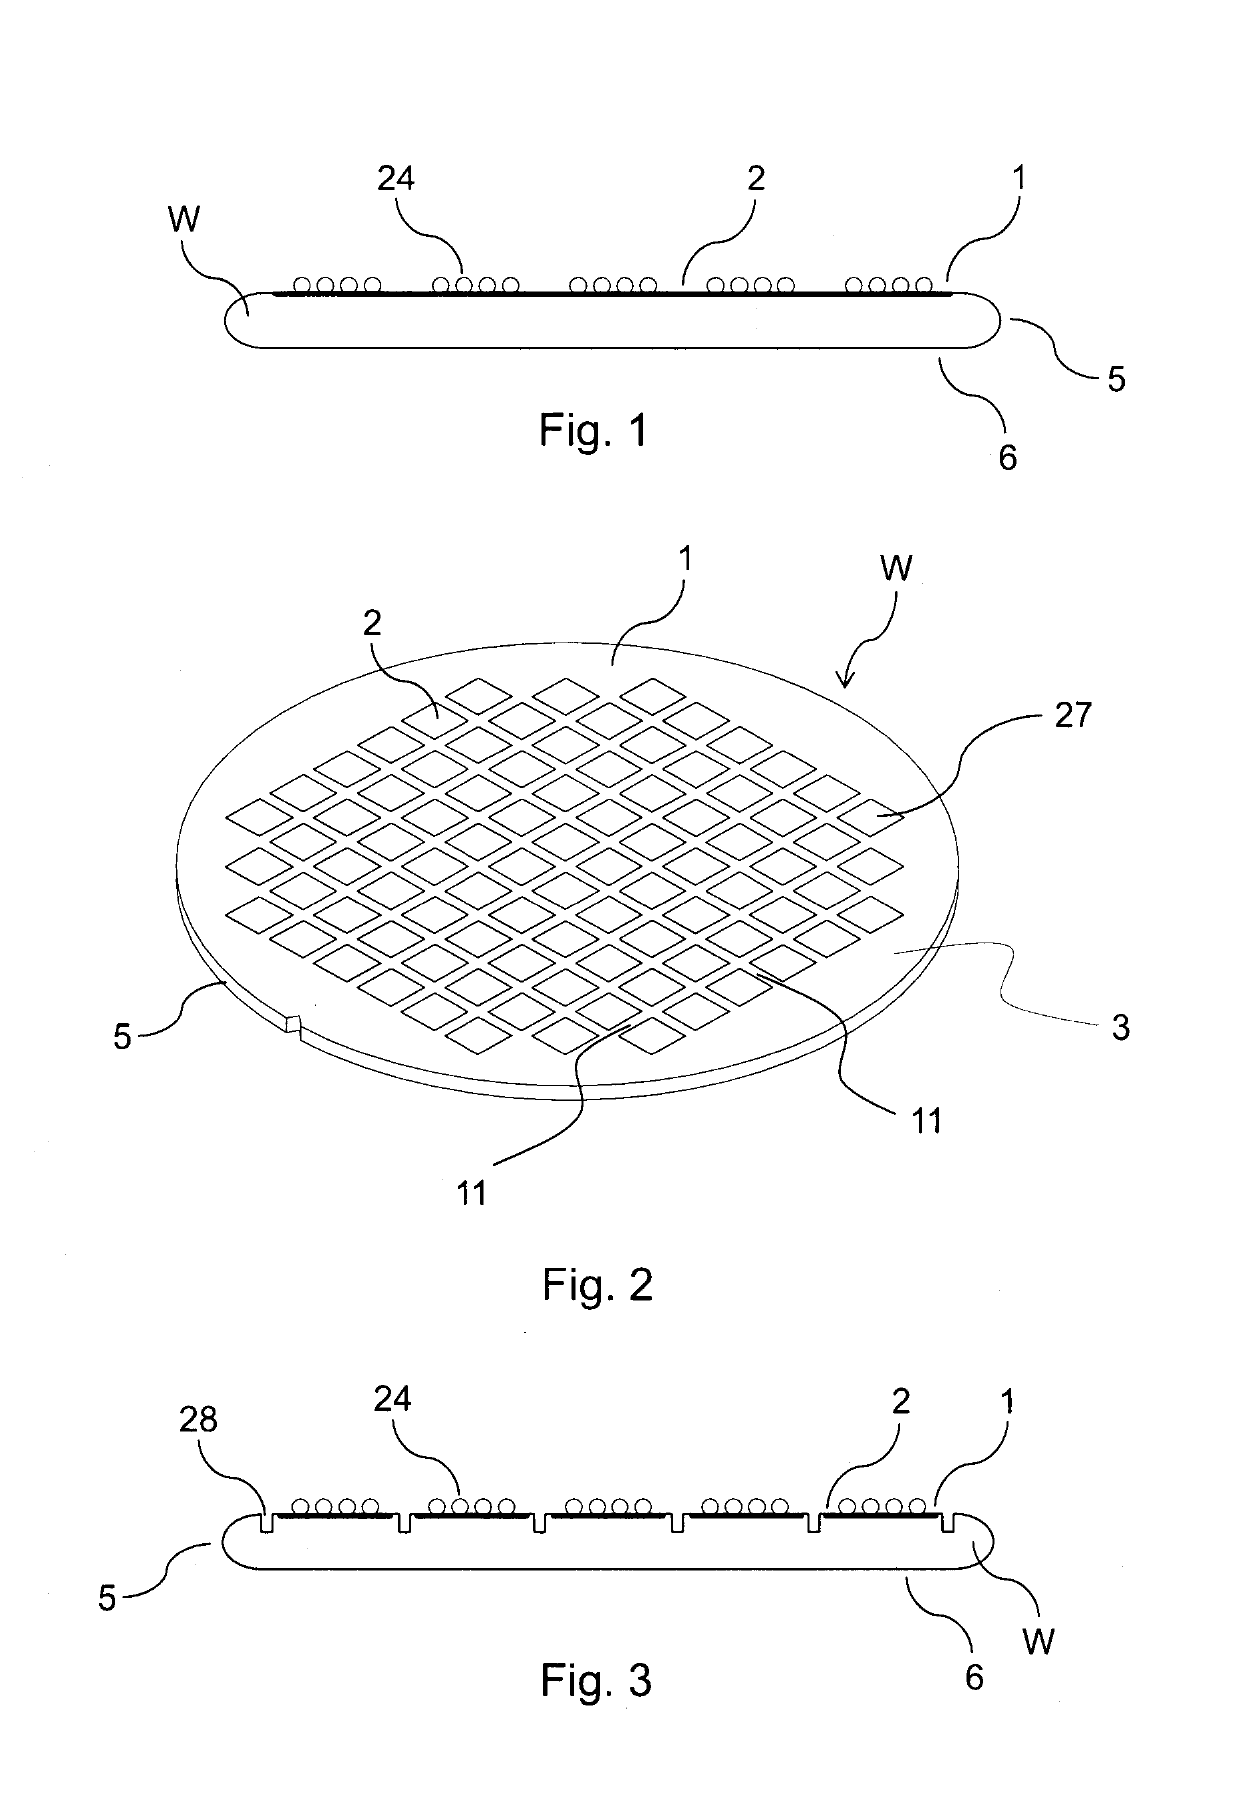 Method of processing a wafer